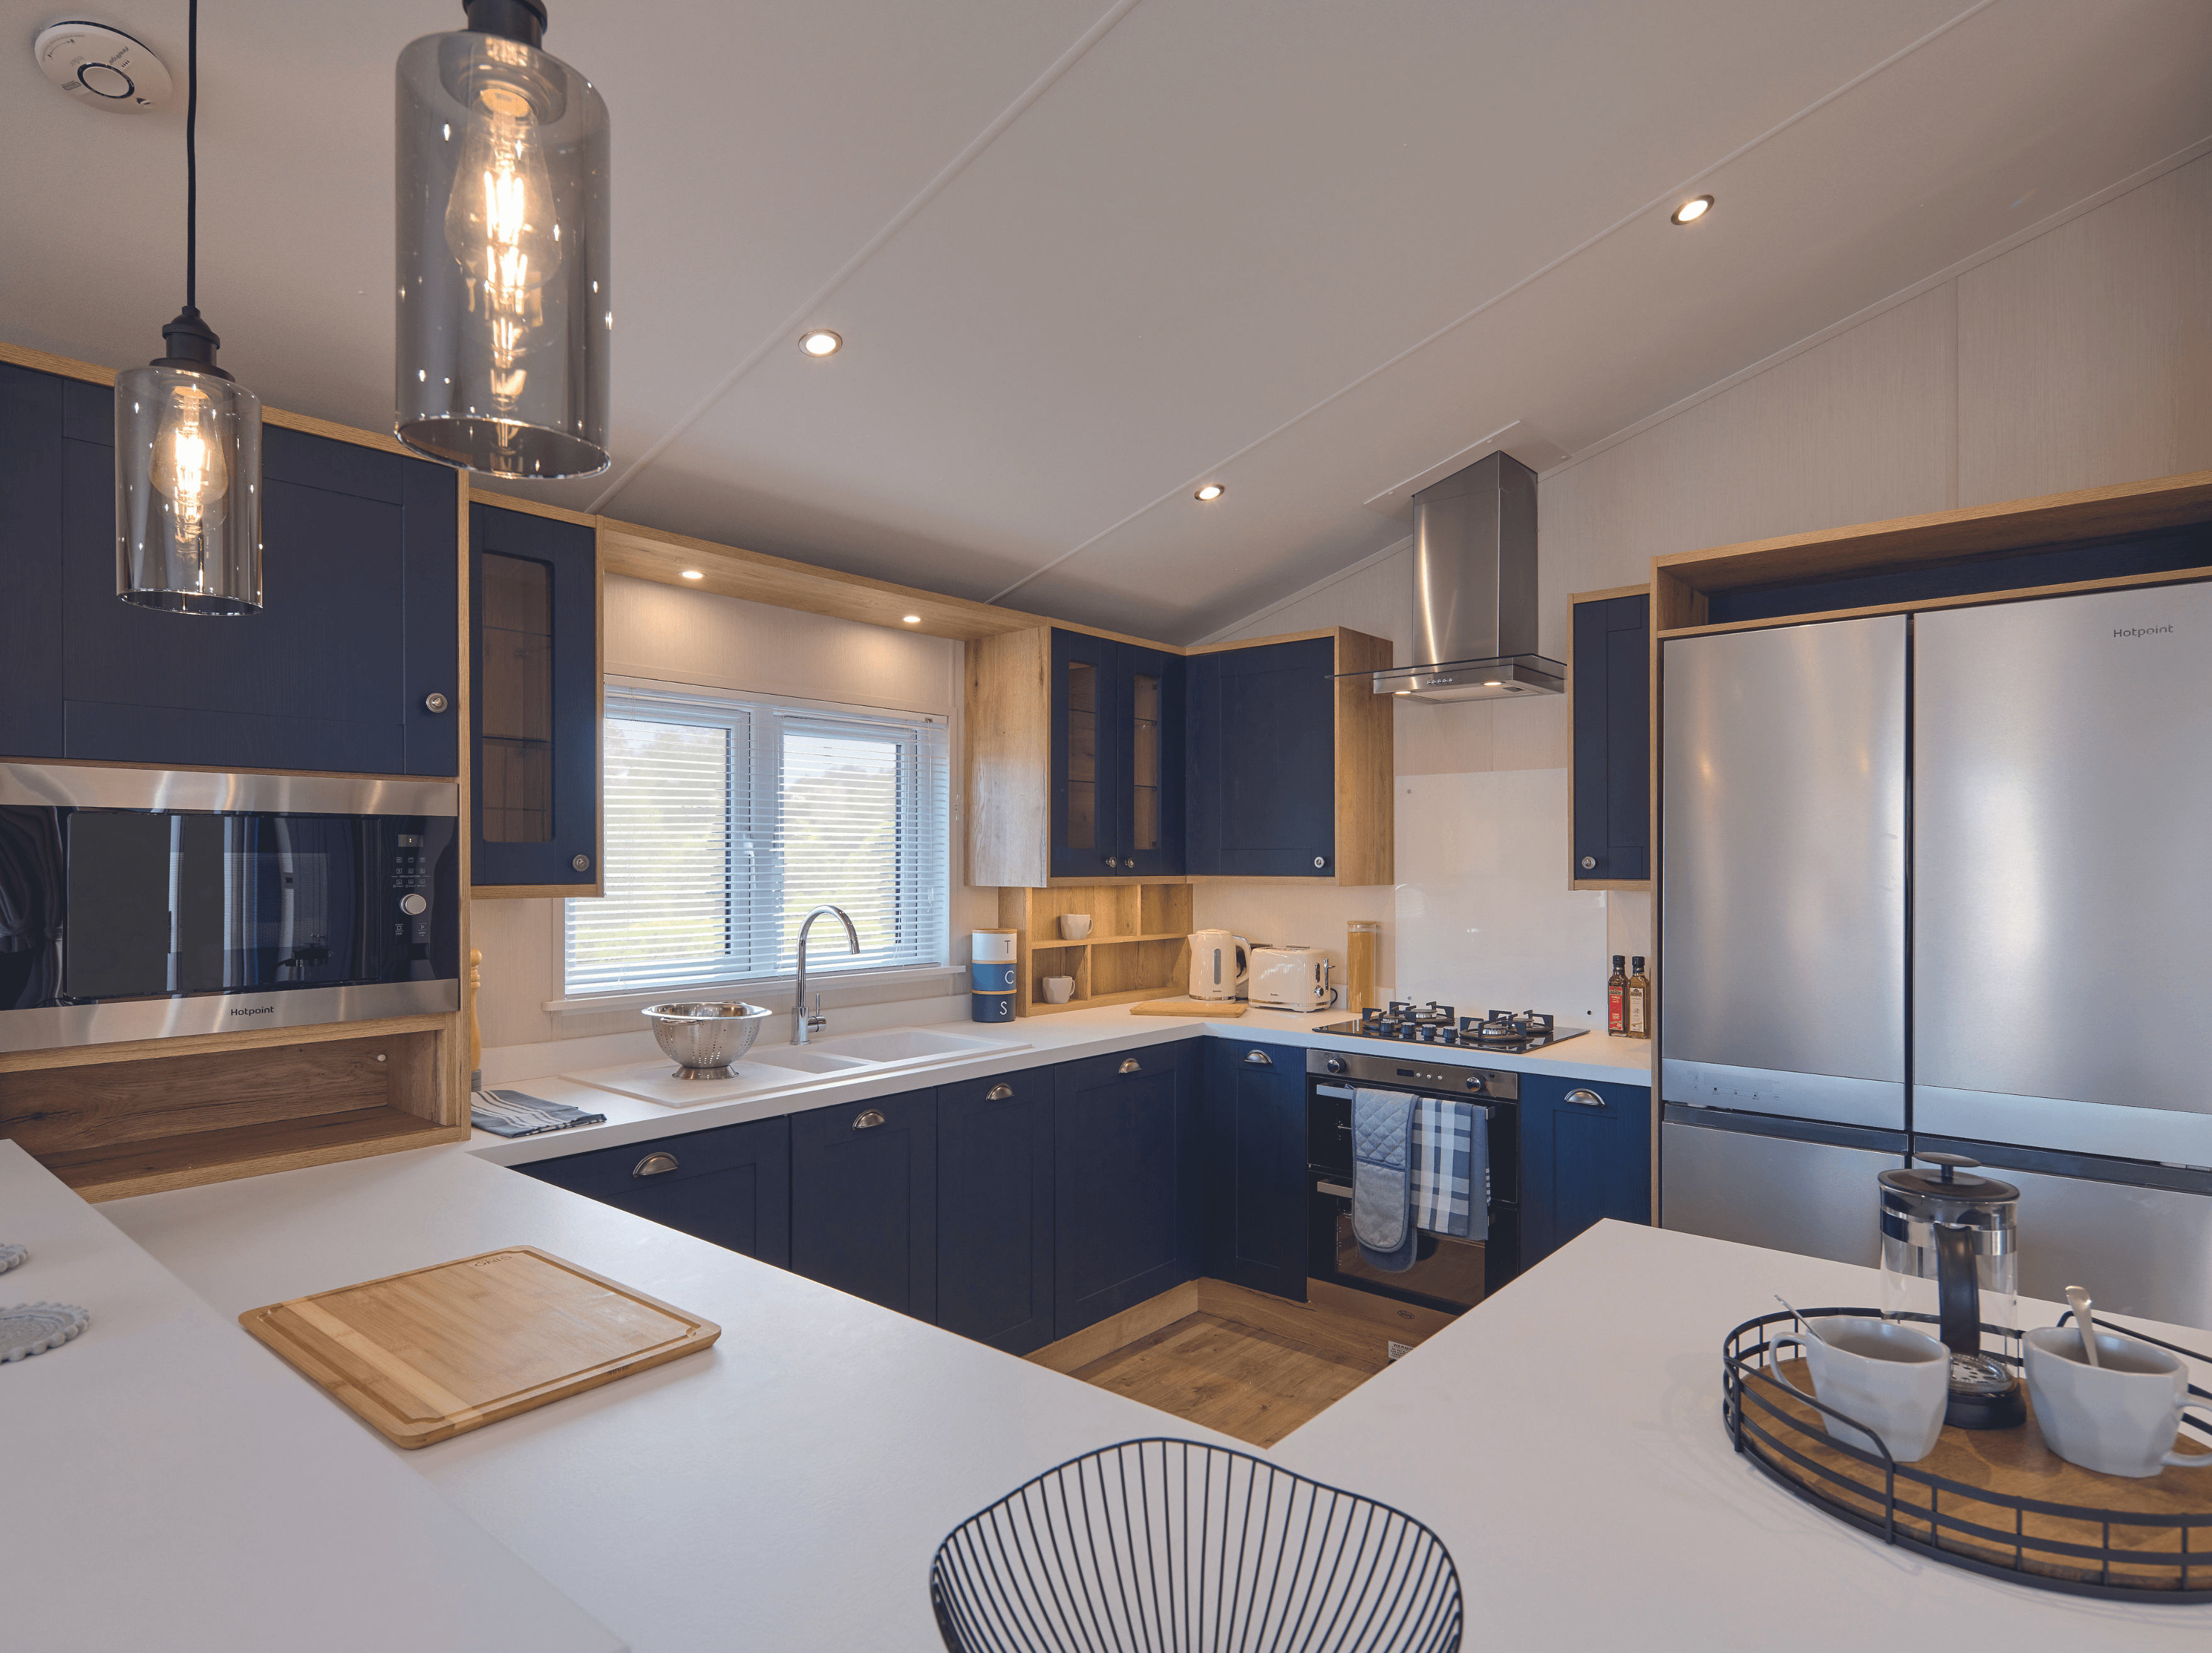 The kitchen of the Willerby New Holland holiday lodge. There is a large double fridge-freezer, fitted cooker and plenty of storage and worktop space. The colour scheme is stylish white and dark blue with wood features. 